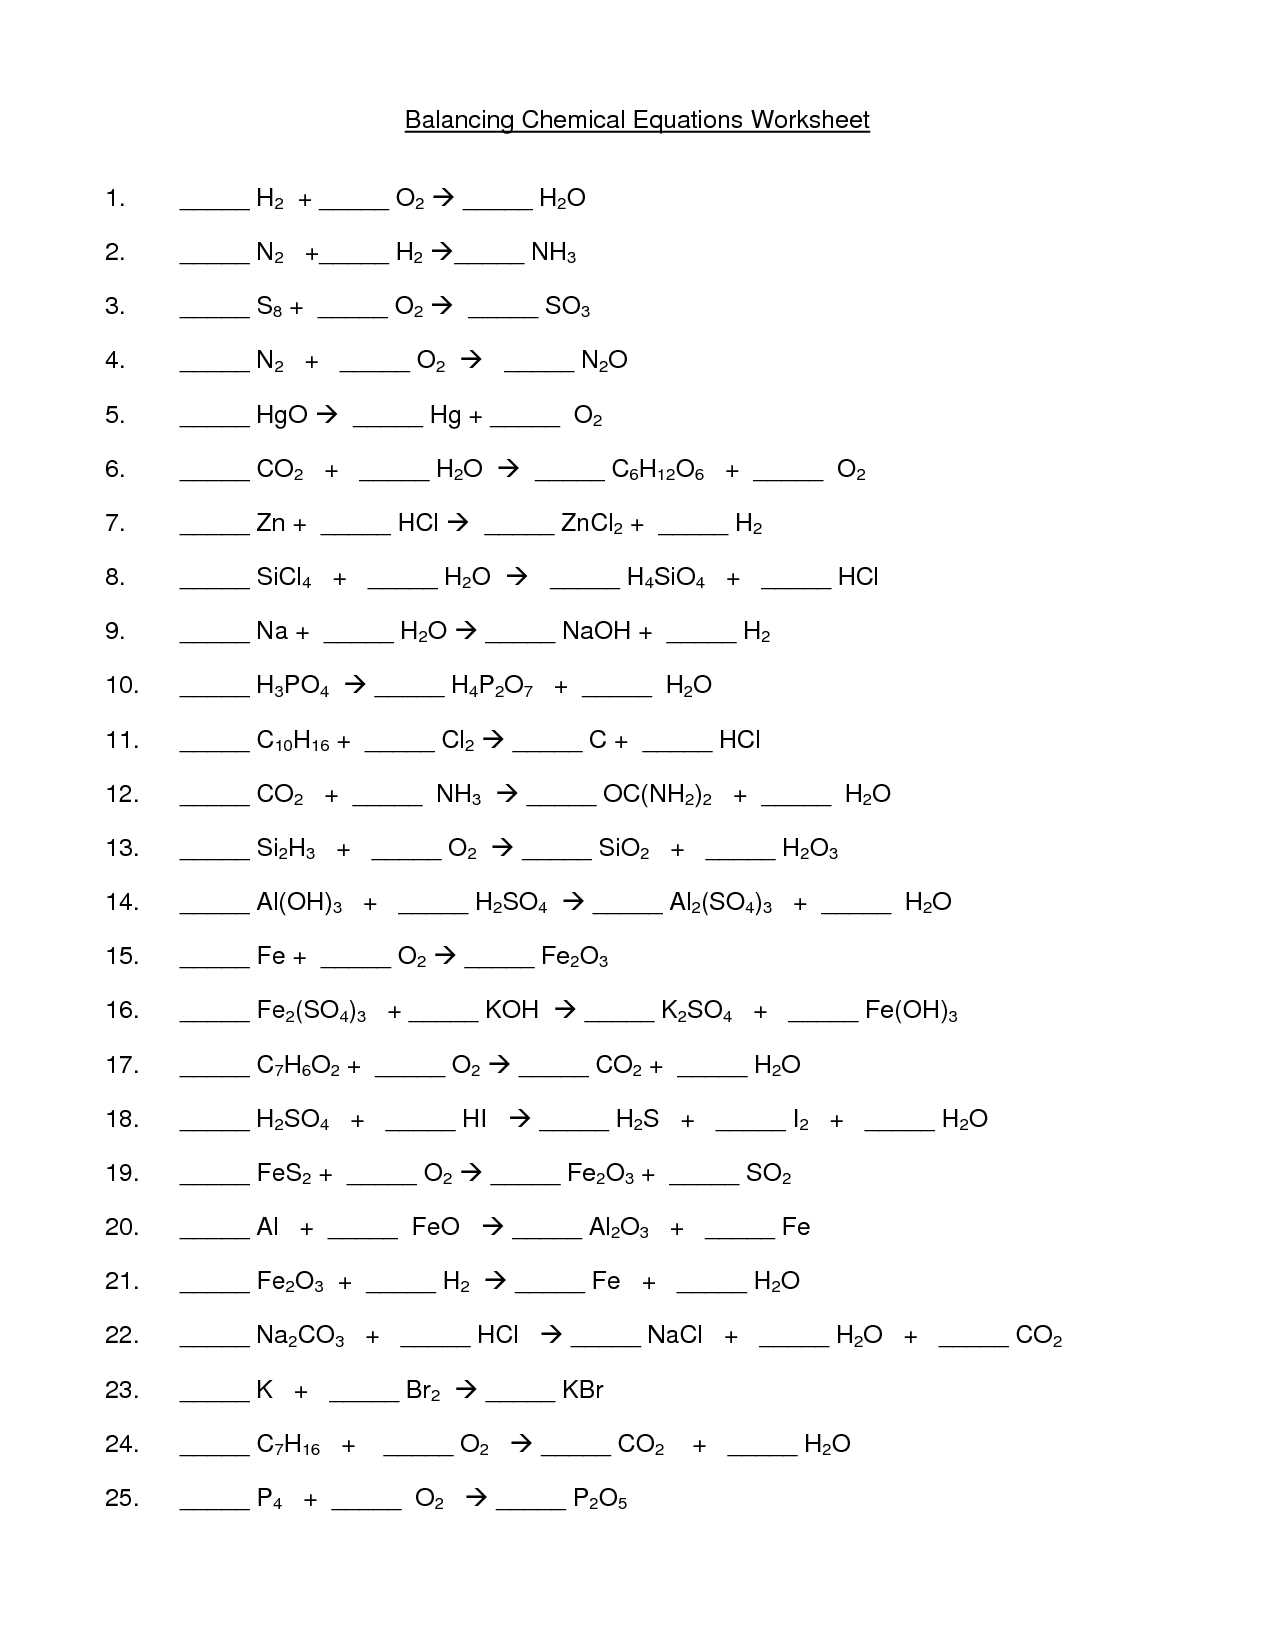 6 Best Images of Balancing Chemical Equations Worksheet ...